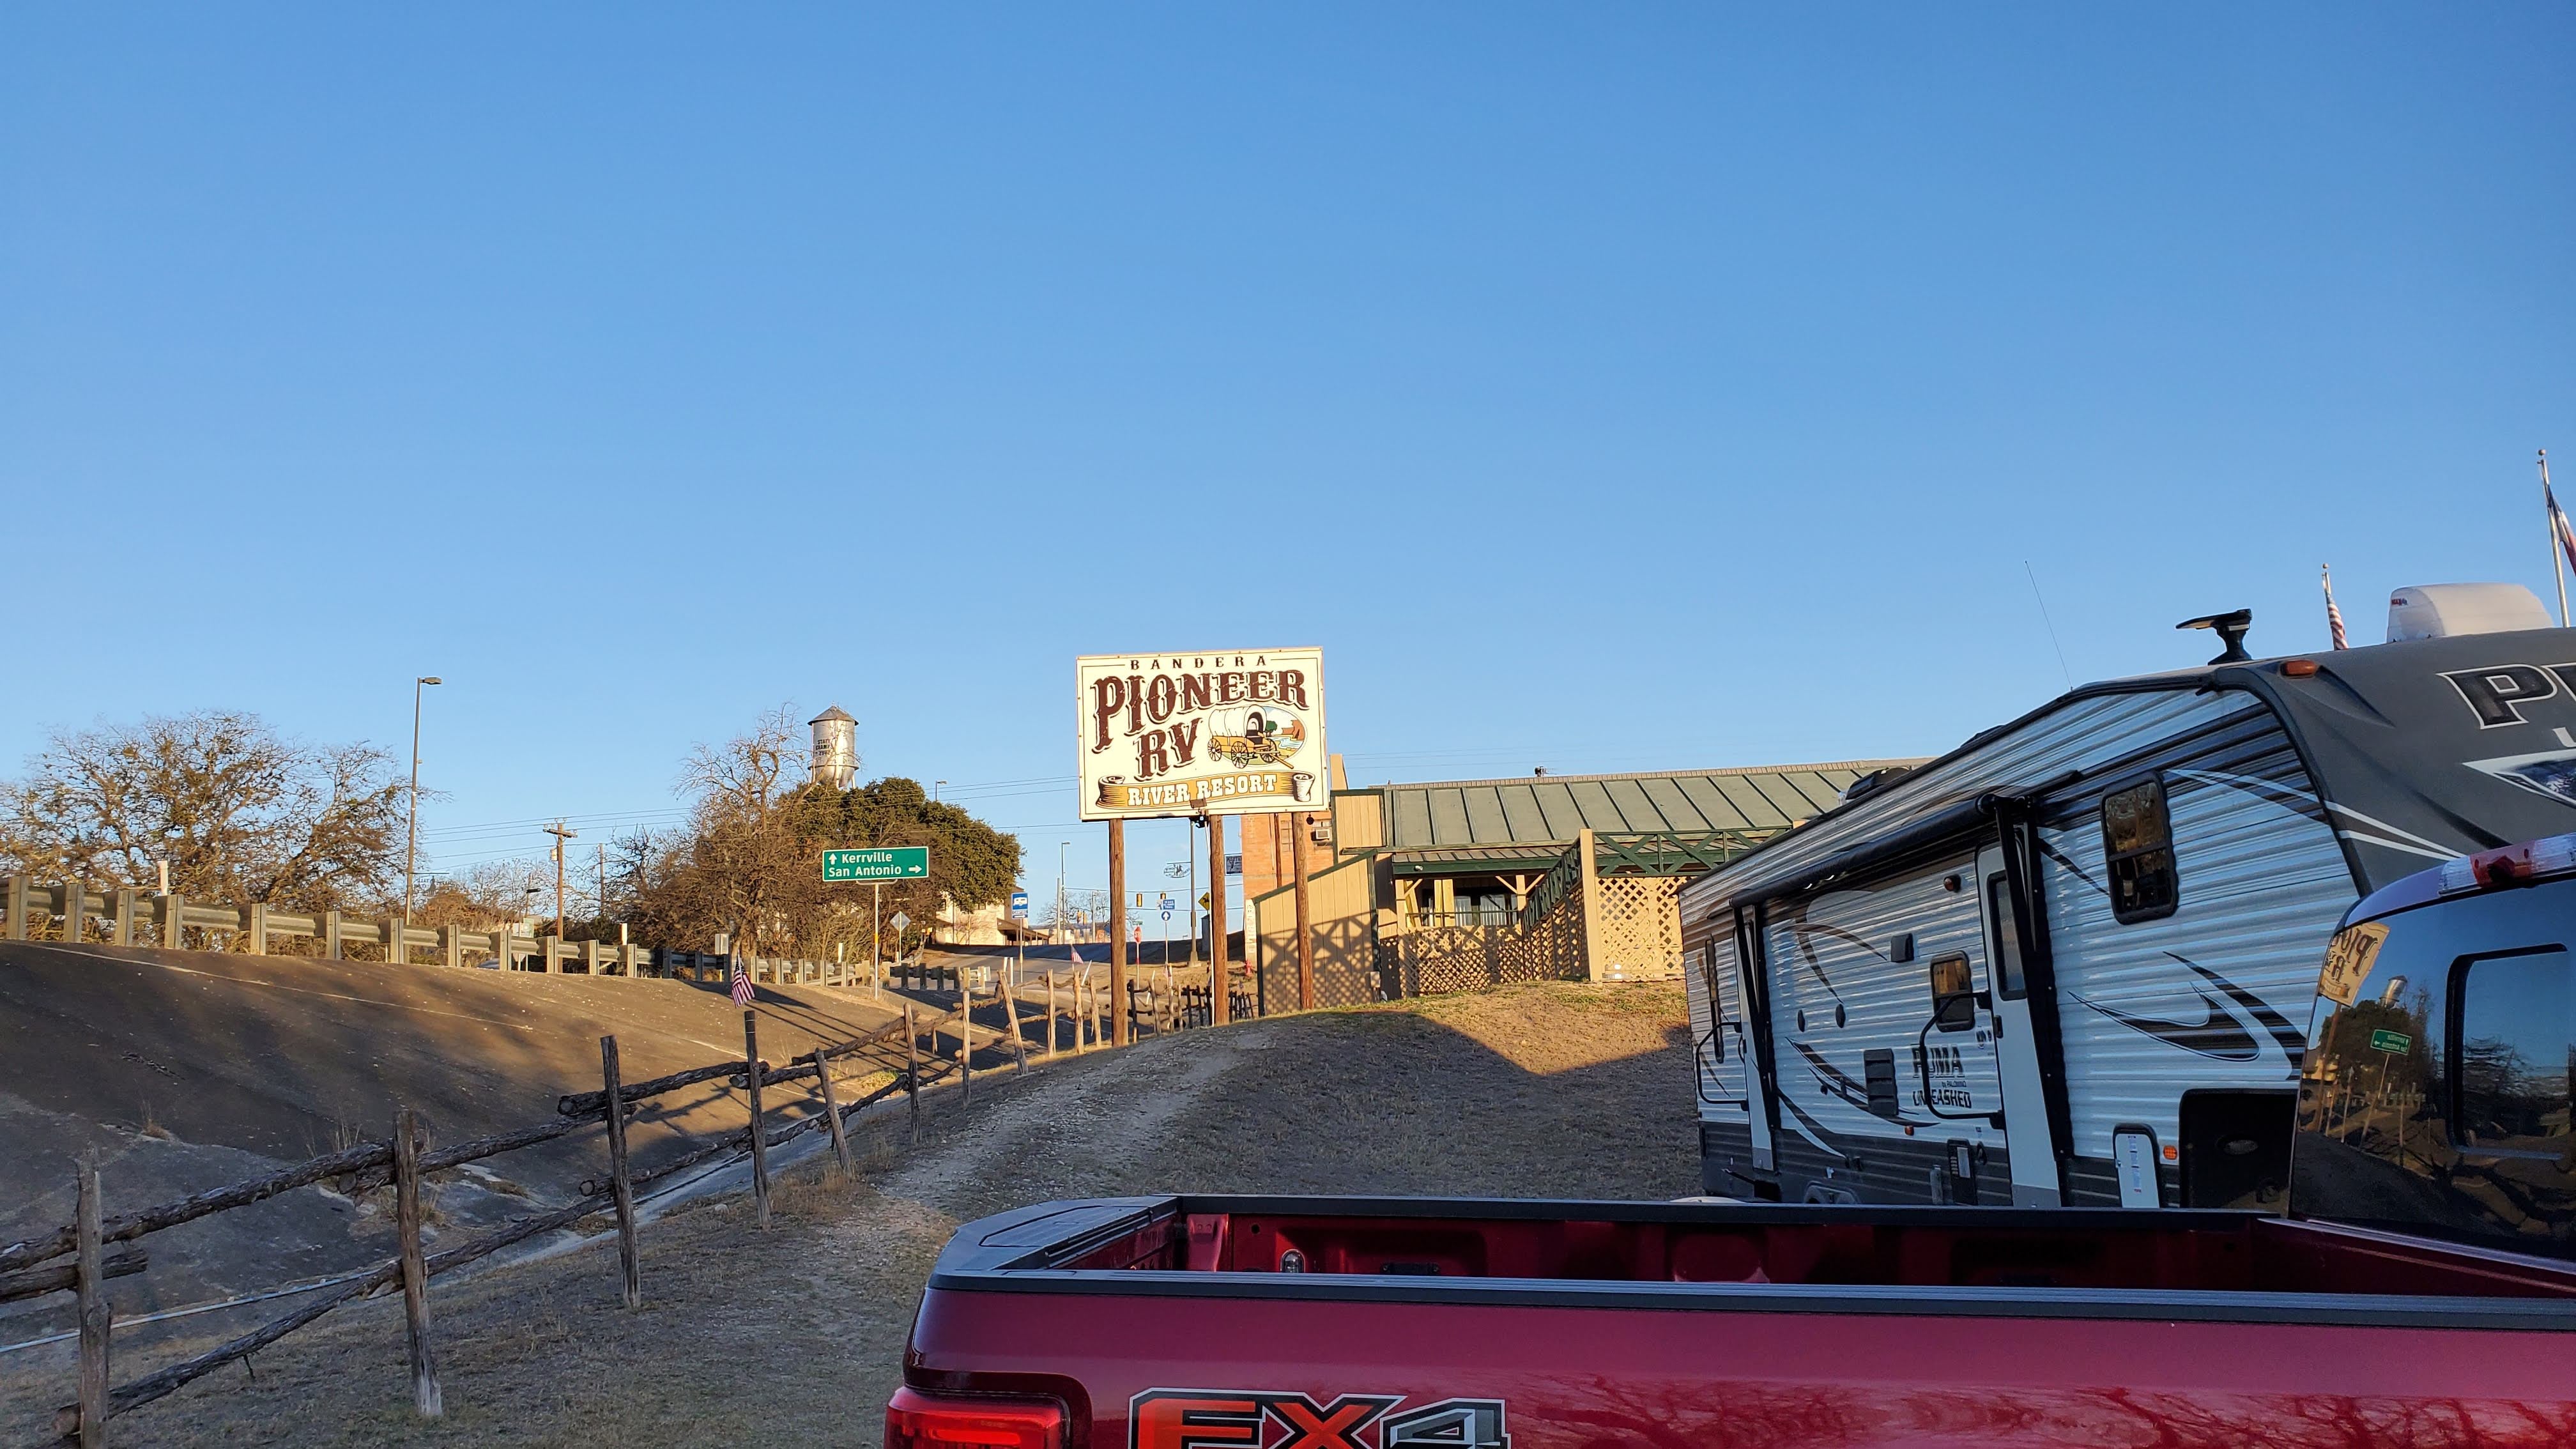 Camper submitted image from Bandera Pioneer RV River Resort - 2